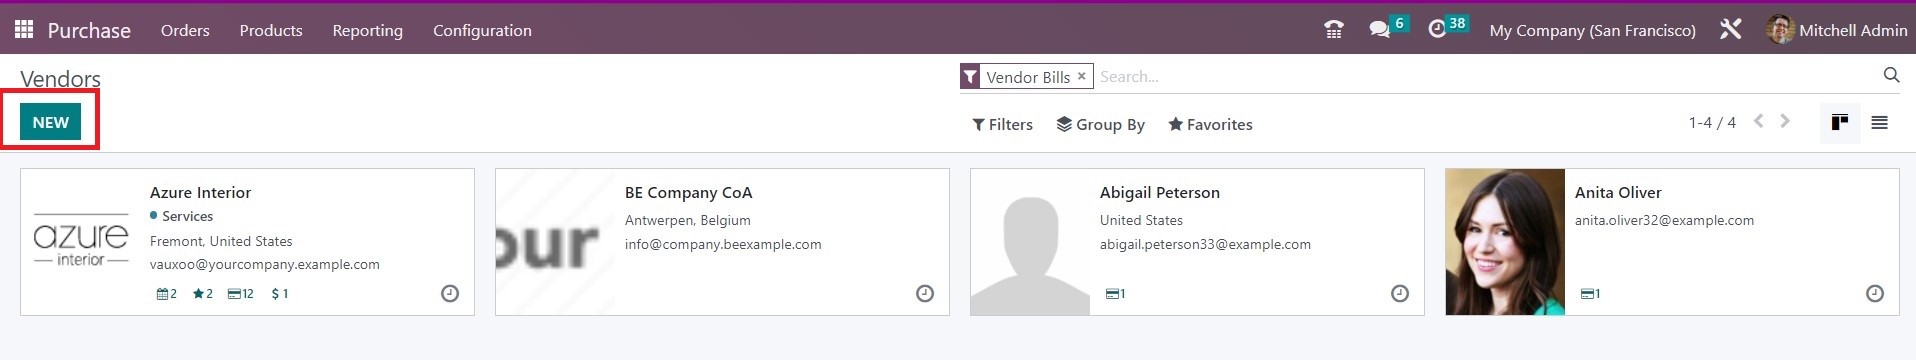 Setting Up Vendor Records and Pricelists in Odoo - Midis - 2